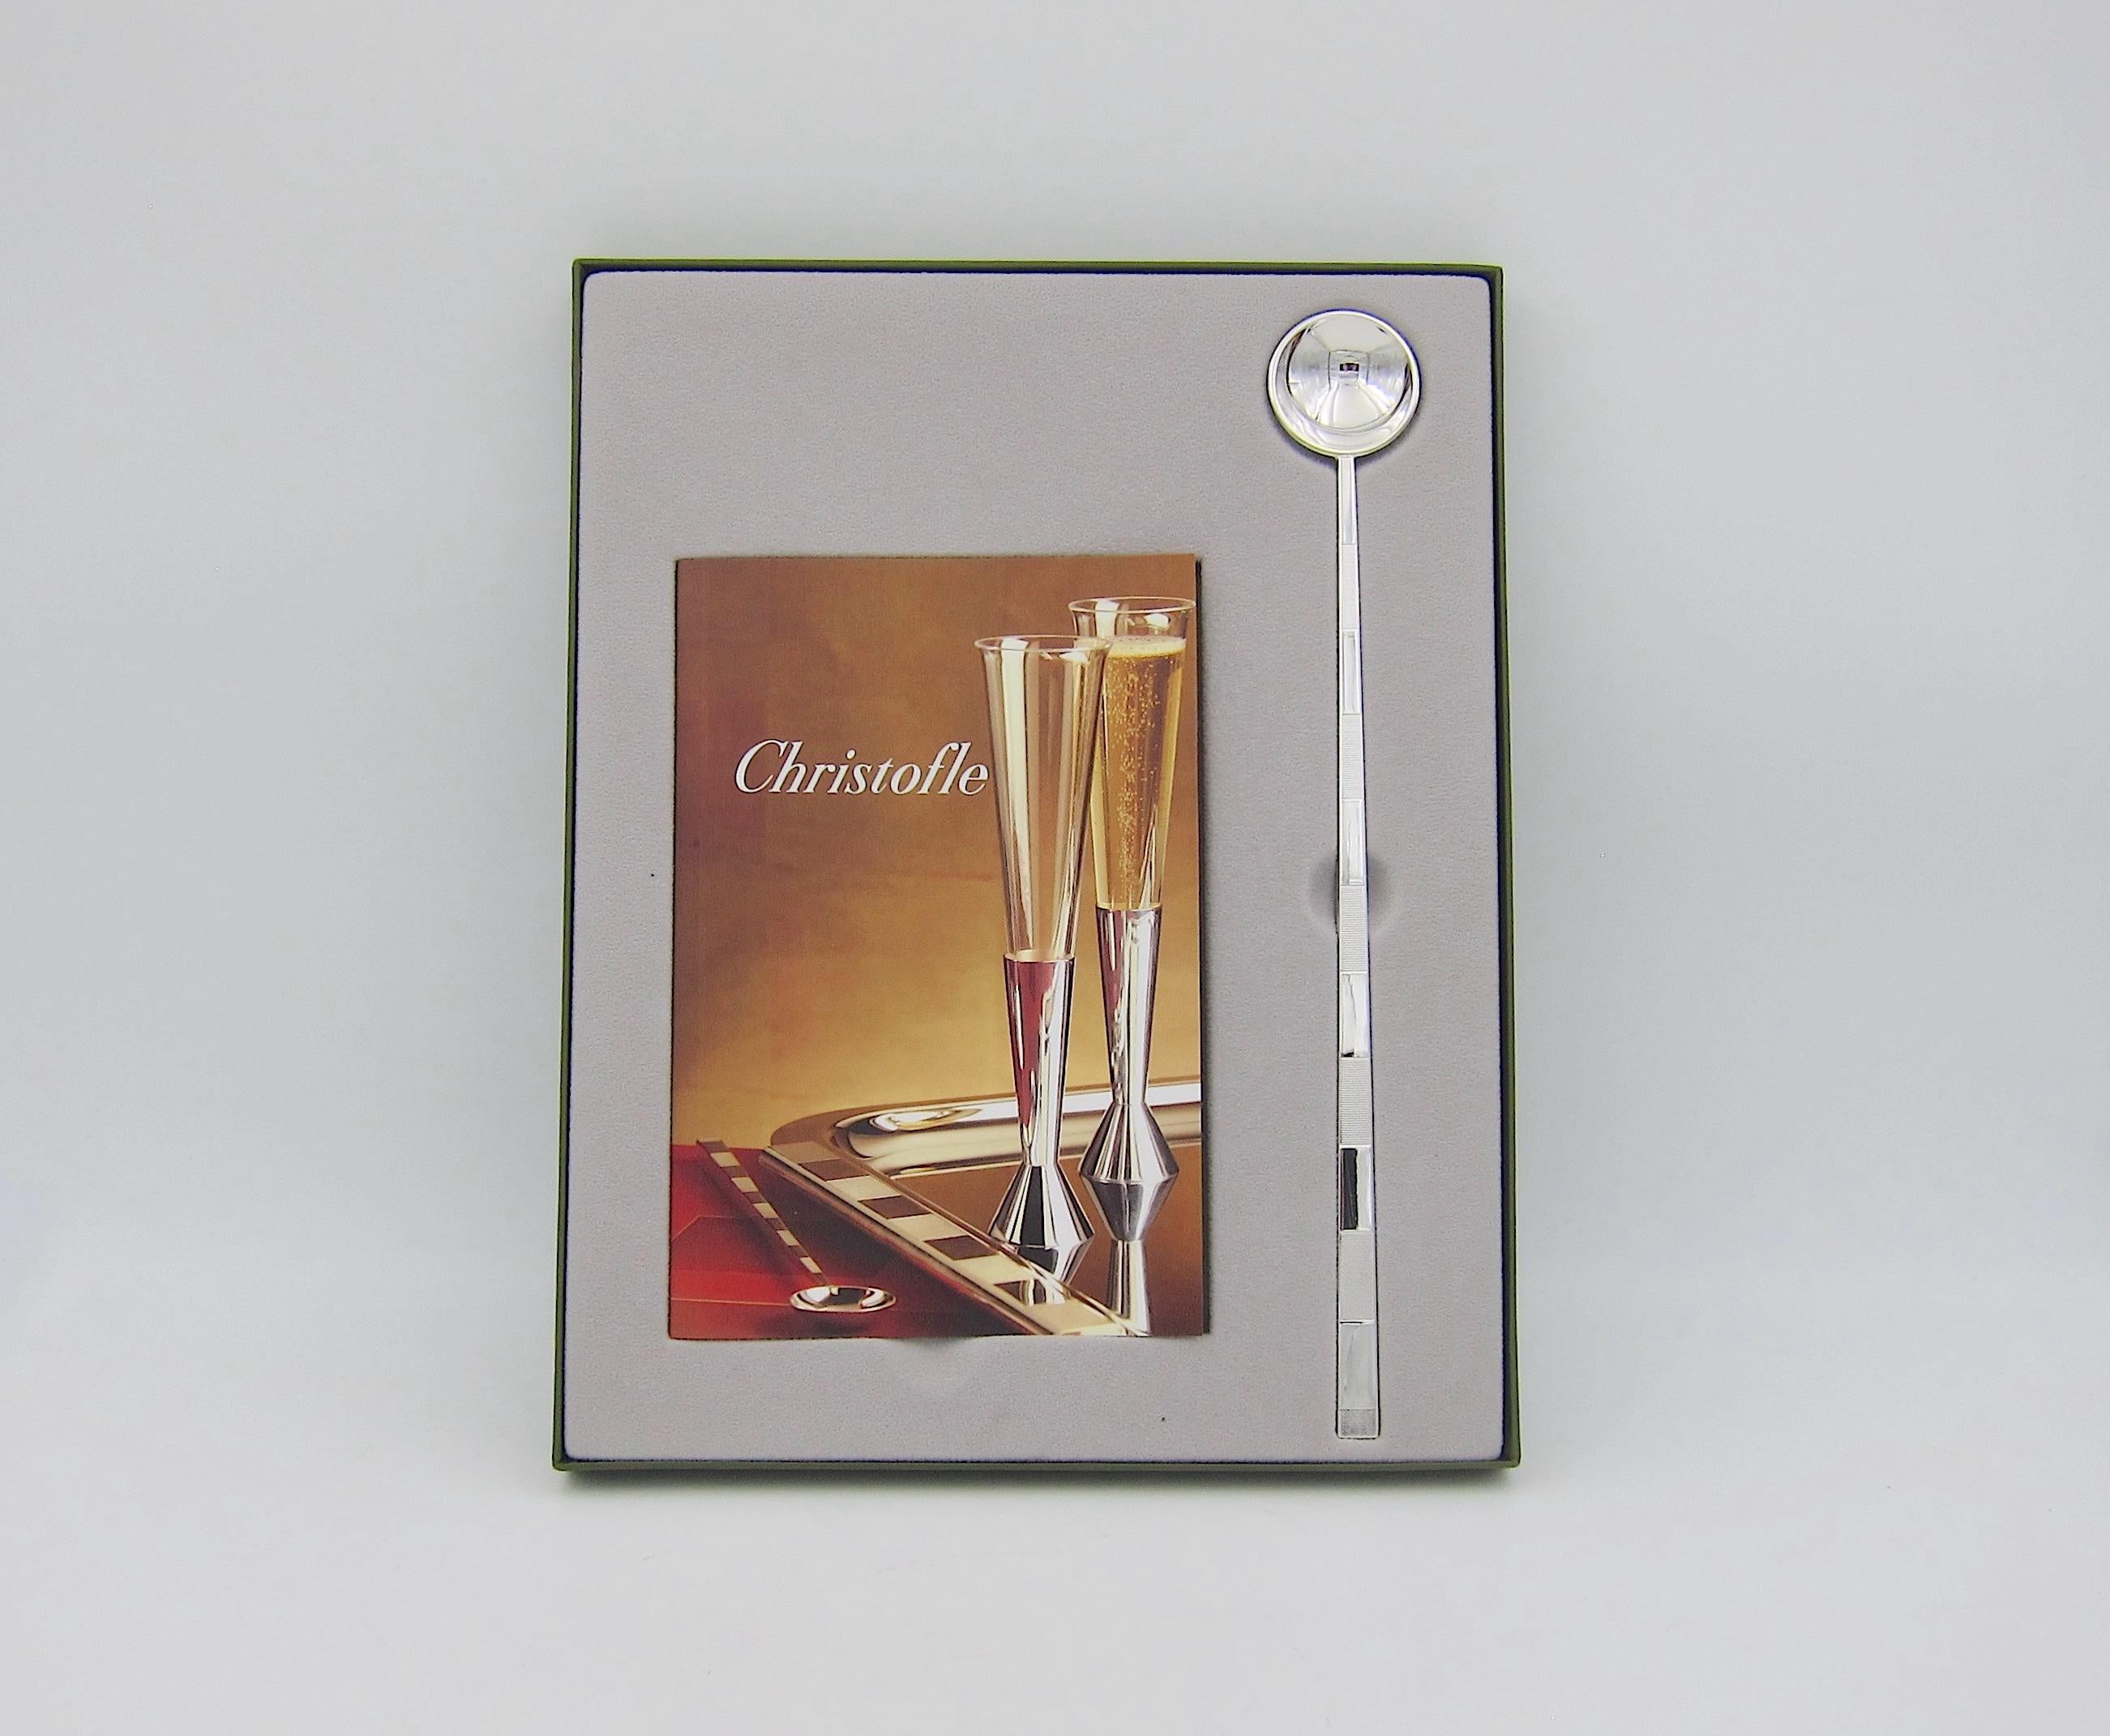 A boxed Christofle of Paris Collection 3000 pattern cocktail spoon designed by American architect and hospitality designer, Adam D. Tihany (b. 1948). The elegant and substantial silver plated spoon is pictured on the cover and on pages 13 and 34 of